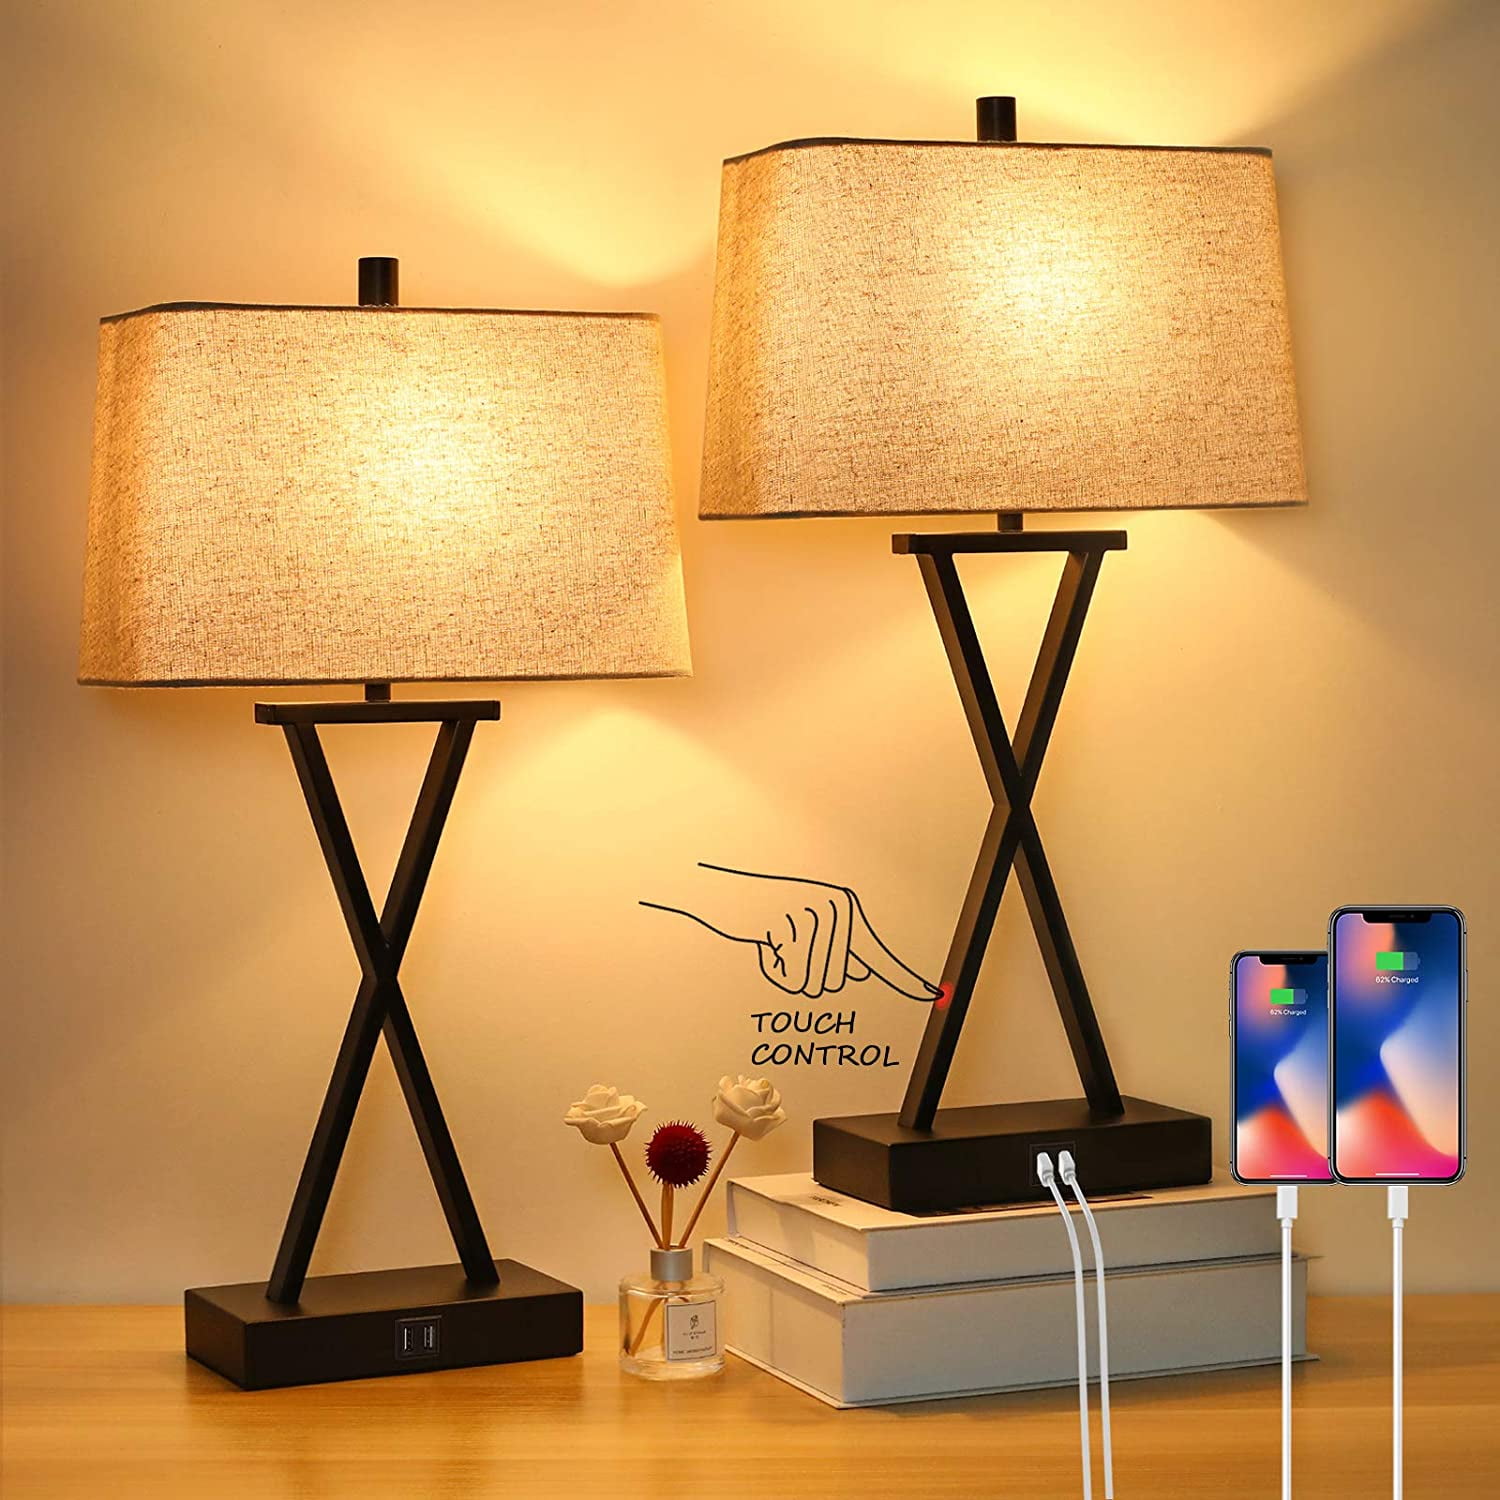 Set of Touch Control 3-Way Dimmable Table Lamp Modern Nightstand Lamp  with USB Port Bedside Desk Lamp with Fabric Shade for Living Room Bedroom  Hotel, Cream, Bulbs Included